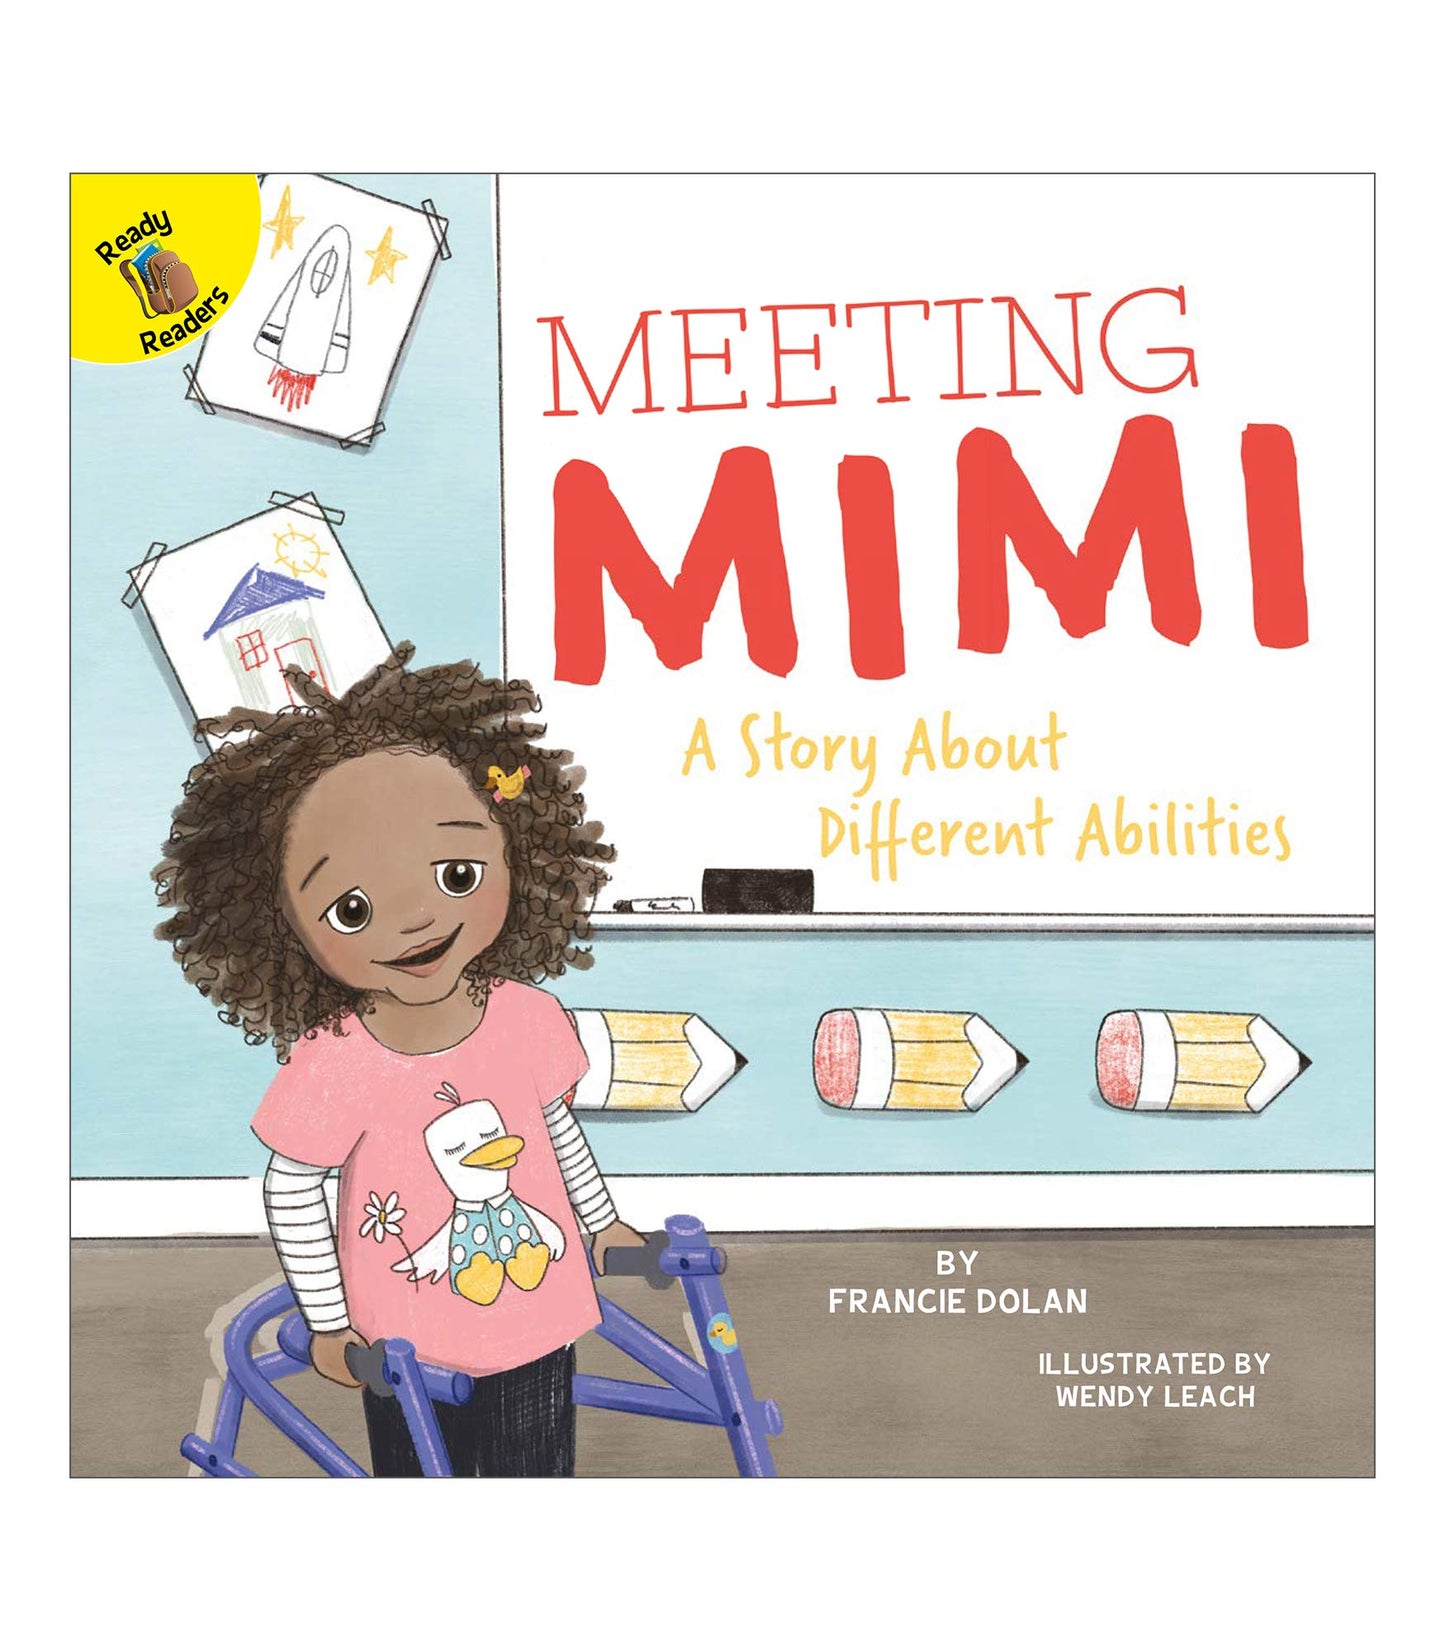 Rourke Educational Media Meeting Mimi: A Story About Different Abilities, Guided Reading Level F Reader (Volume 7) (Playing and Learning Together)